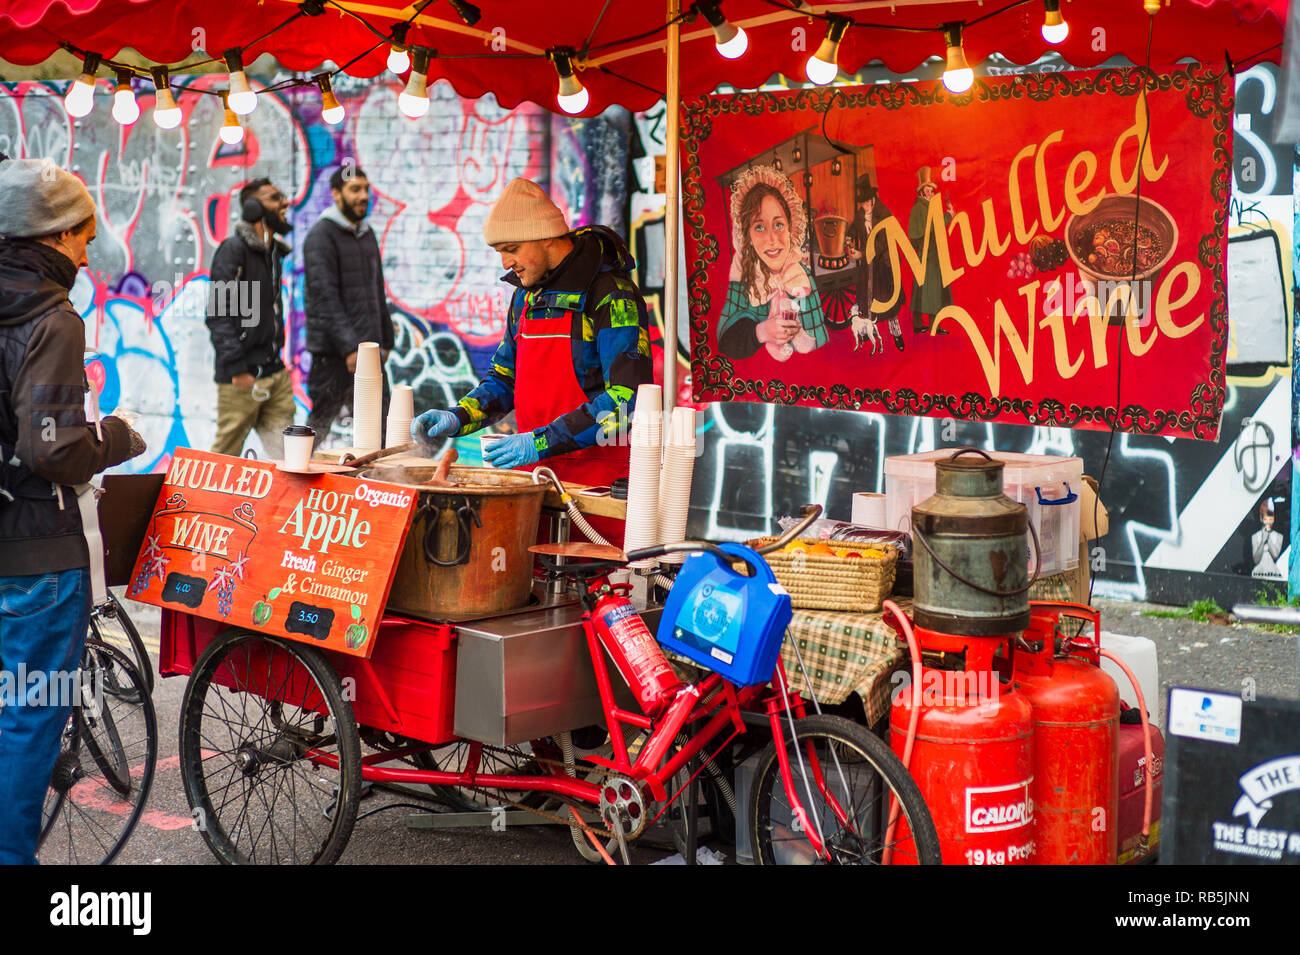 Mulled Wine stall in Brick Lane Market Shoreditch East London Stock Photo